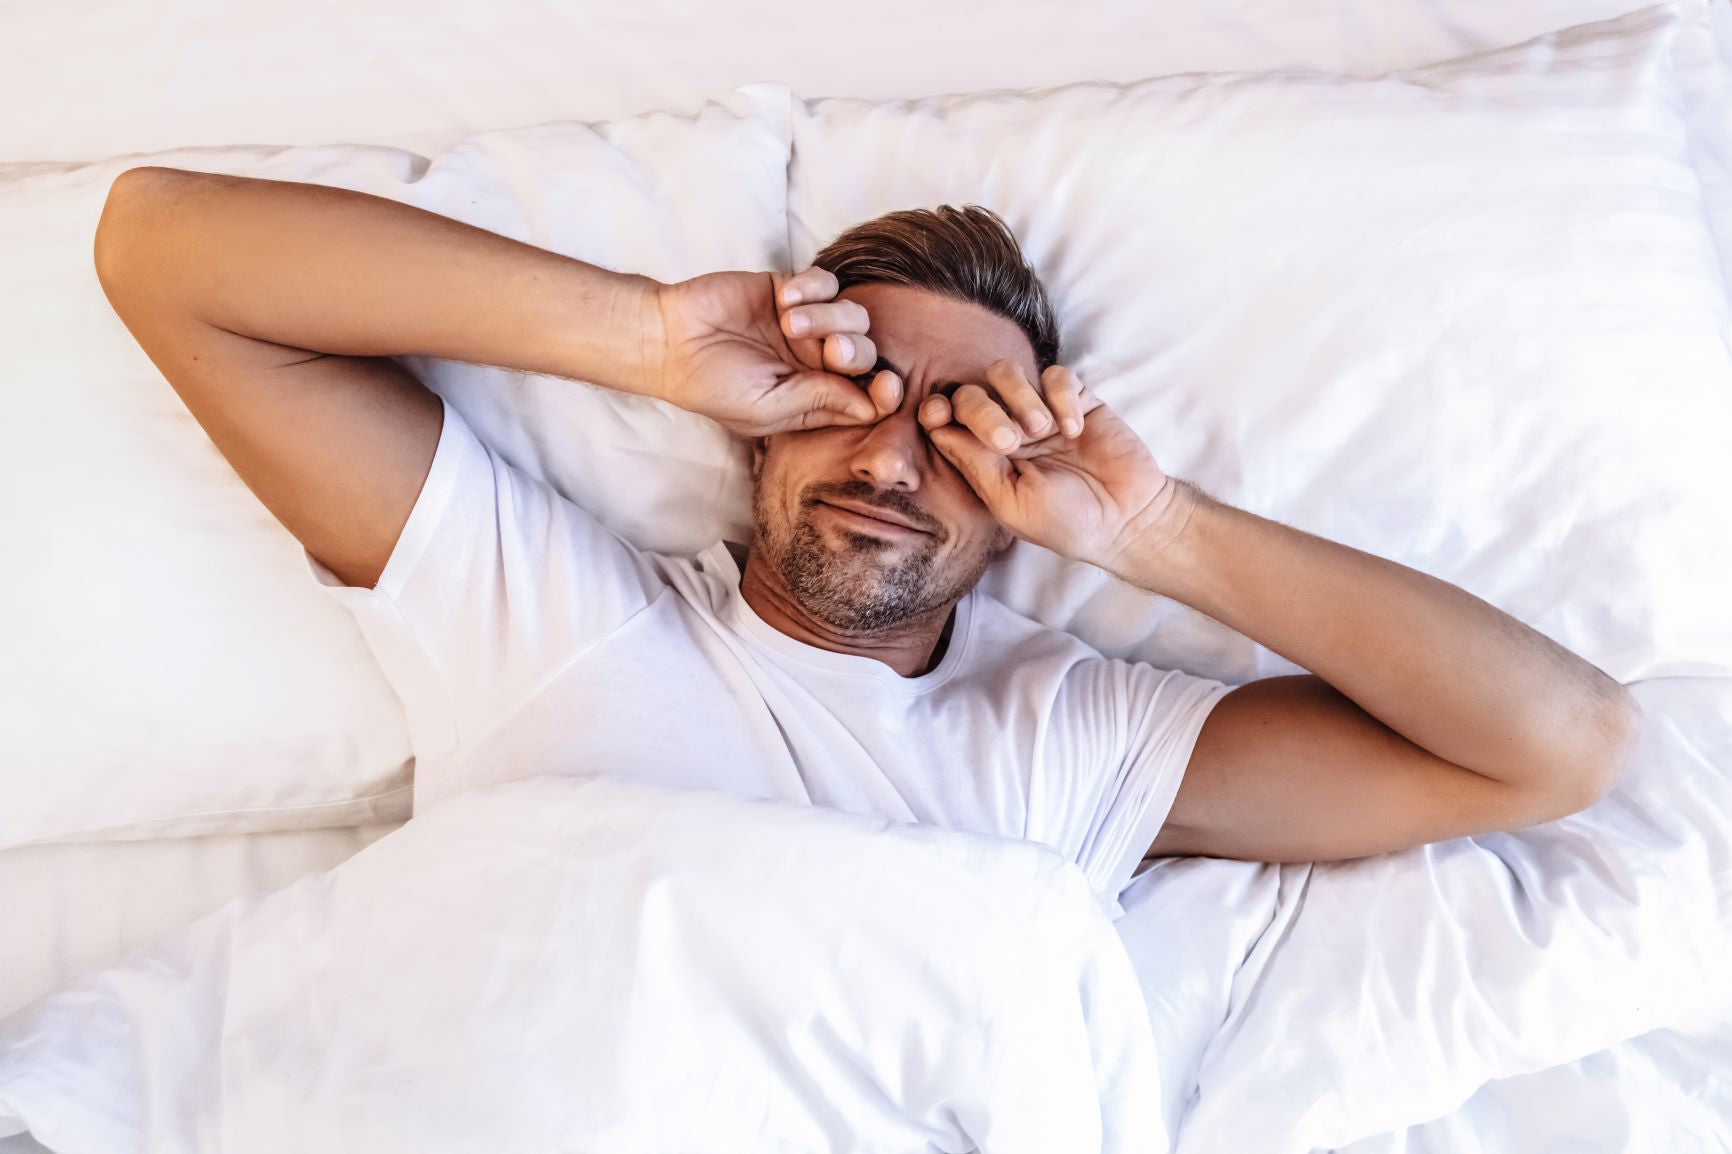 Want Better Sleep? Five Health Experts Share Their Top Tips!